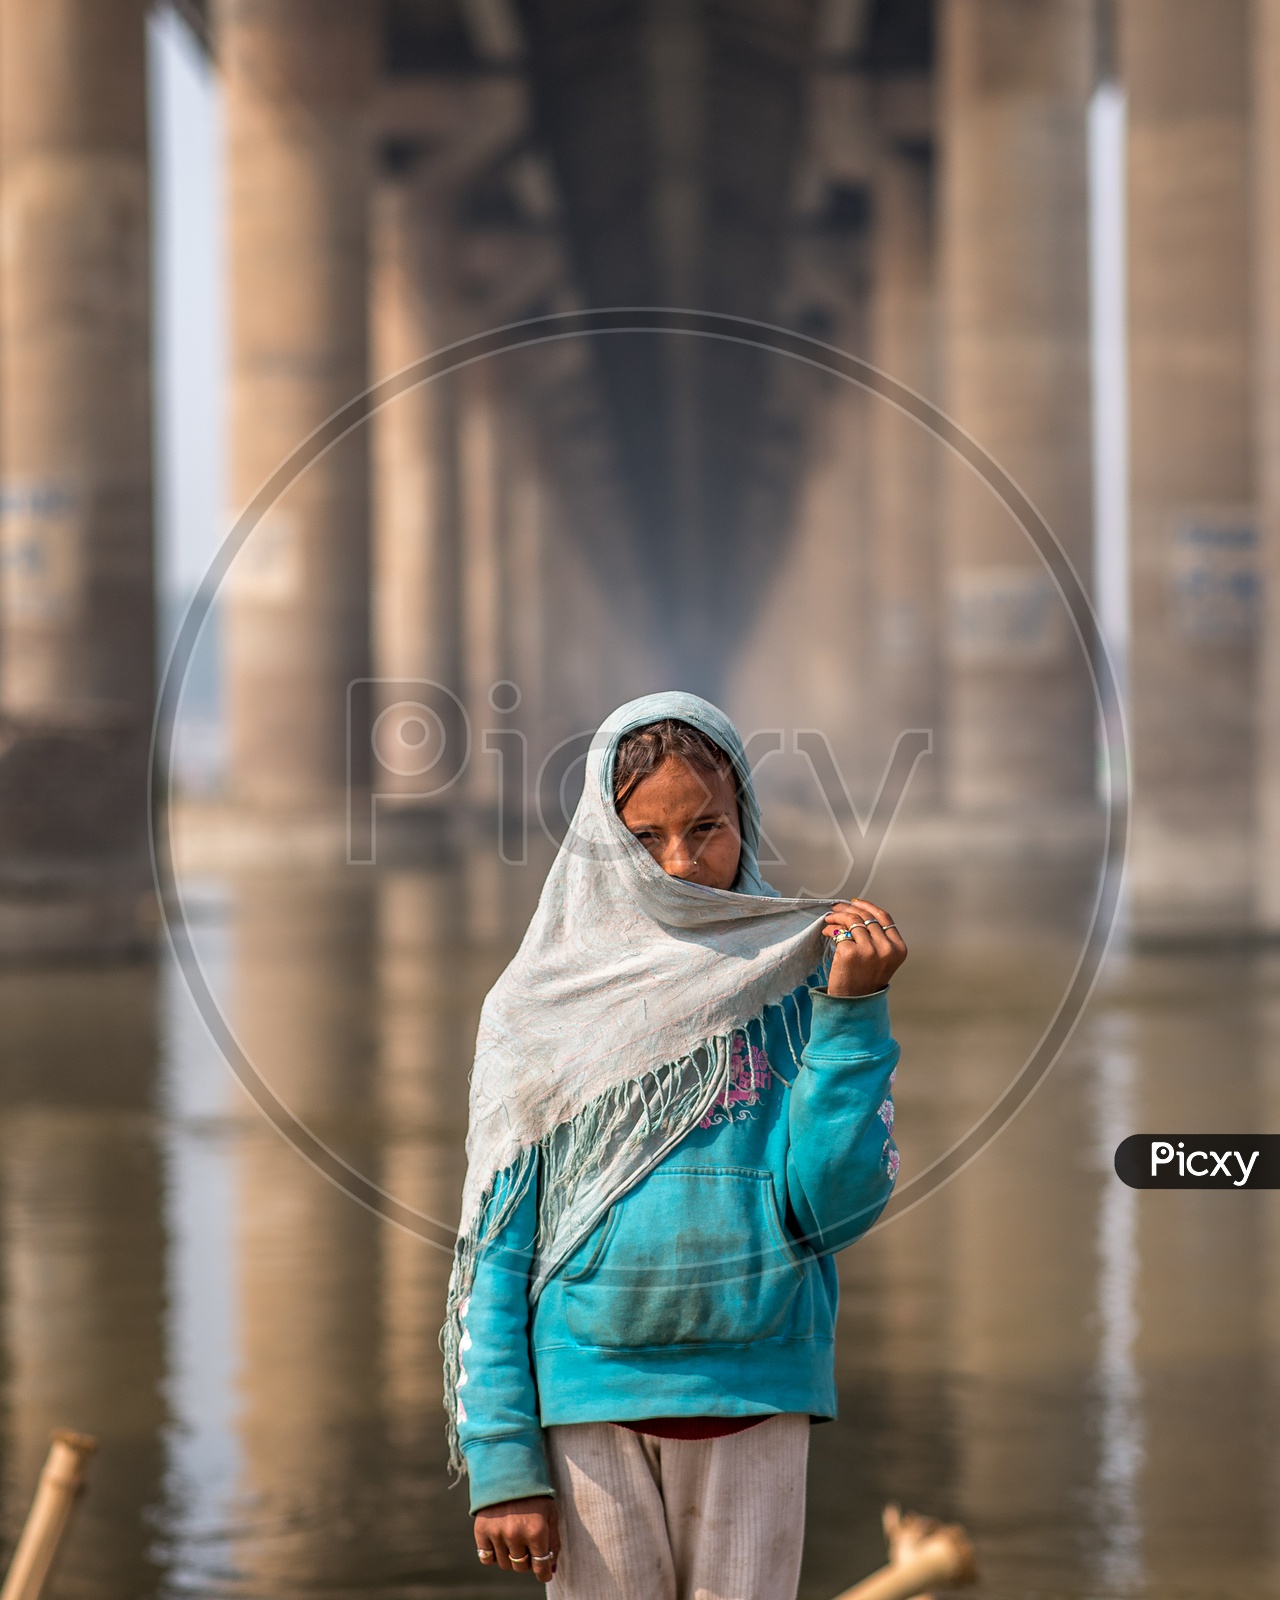 A Young Indian Girl Portrait At a Water Bridge